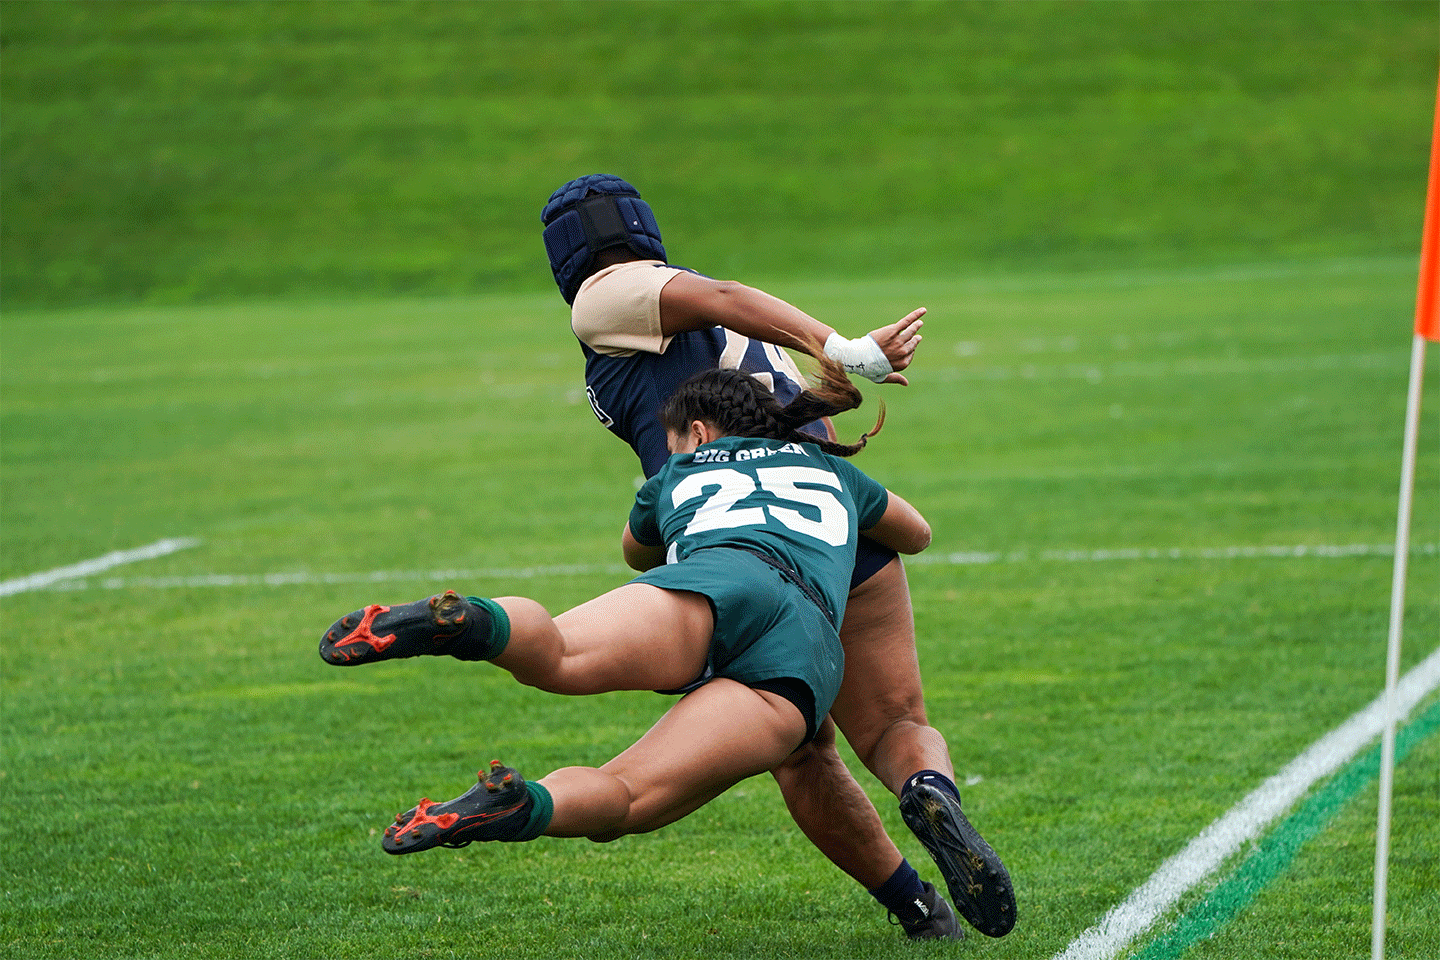 Dartmouth rugby player Anjali Pant tackle